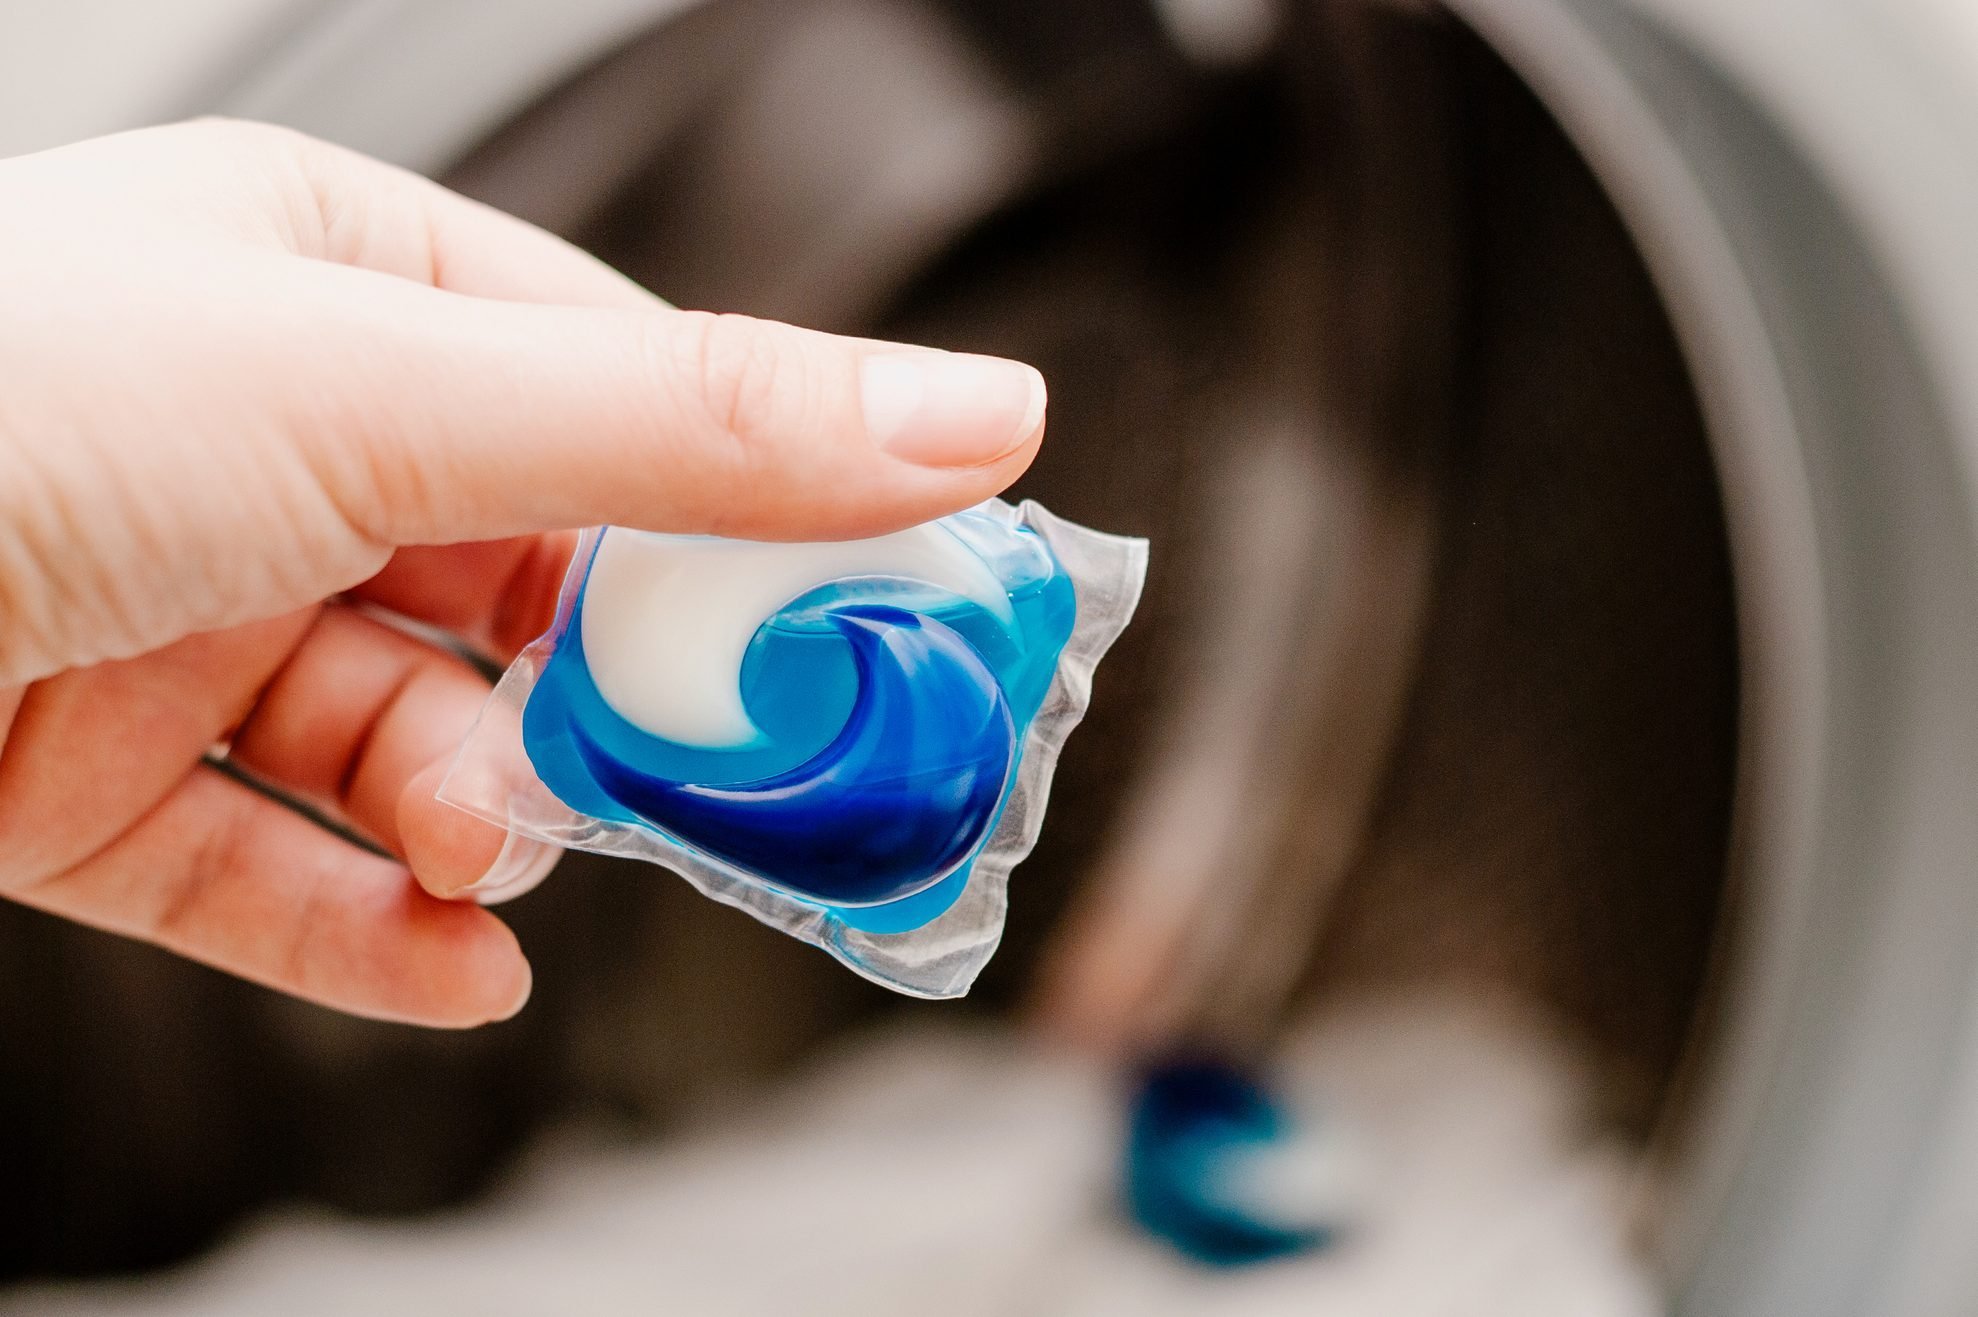 Here's Where You Should Put Your Dishwasher Detergent Pods